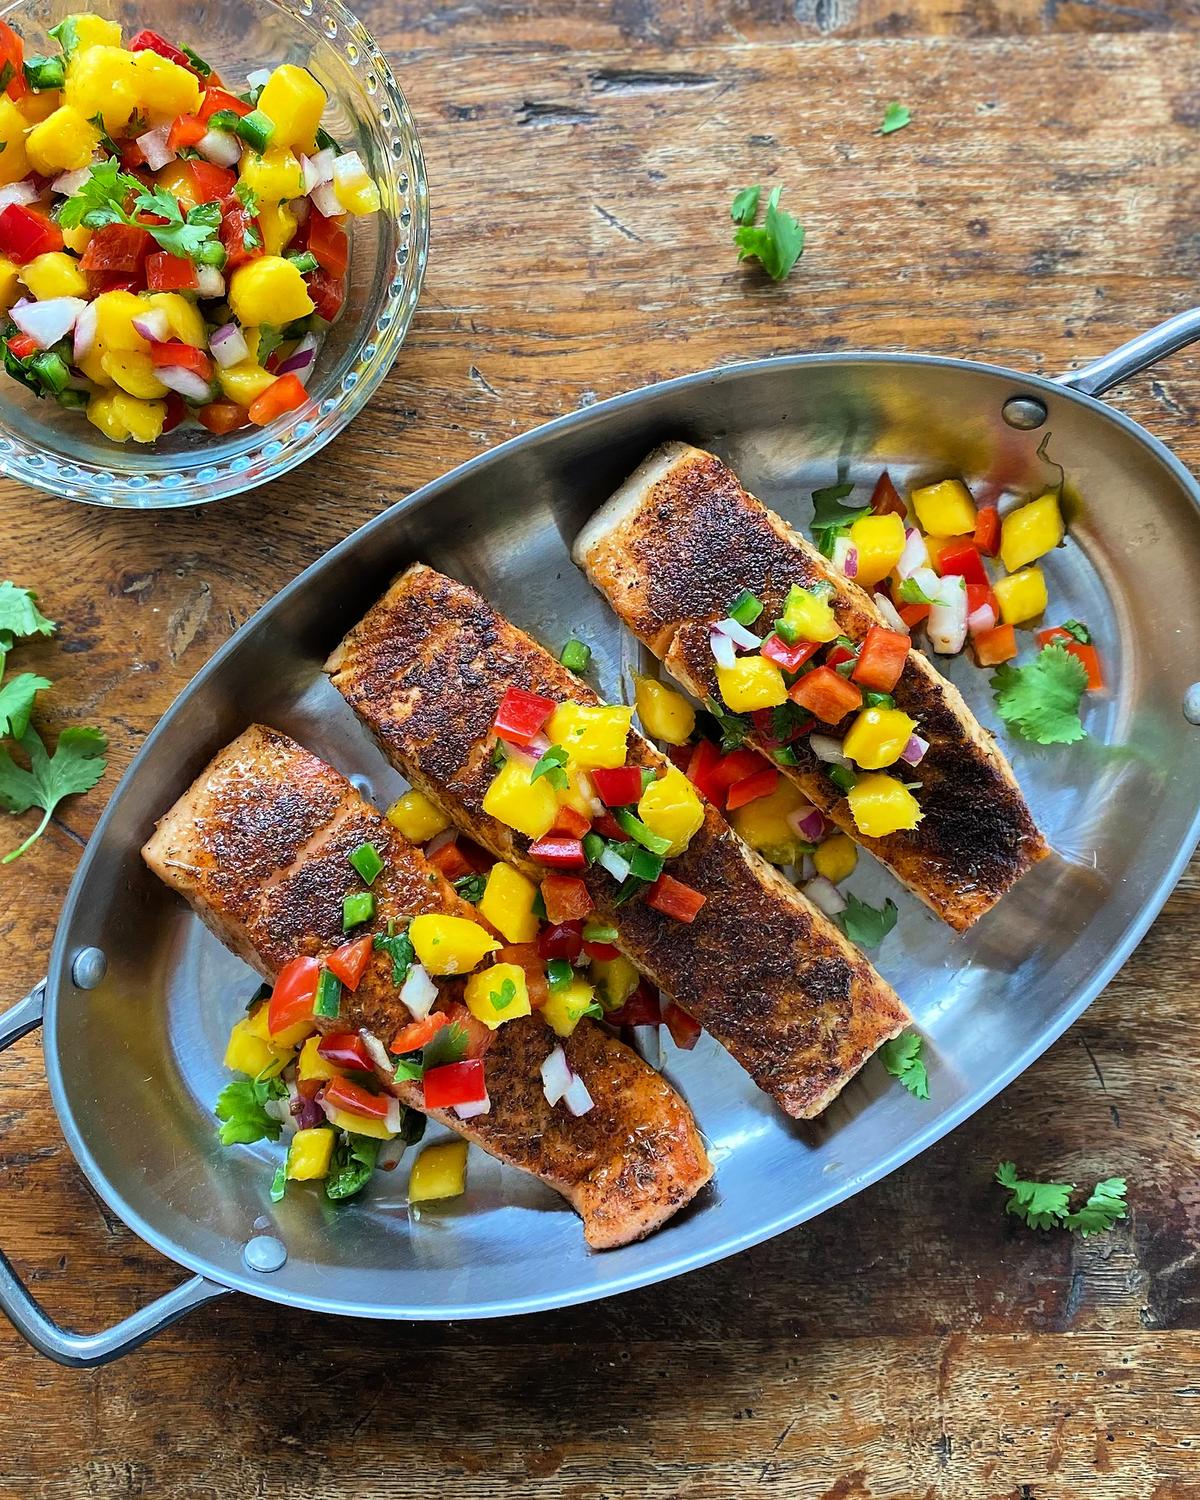 A juicy mango salsa cools and complements the savory, spicy rub for a perfectly balanced bite. (Lynda Balslev for Tastefood)